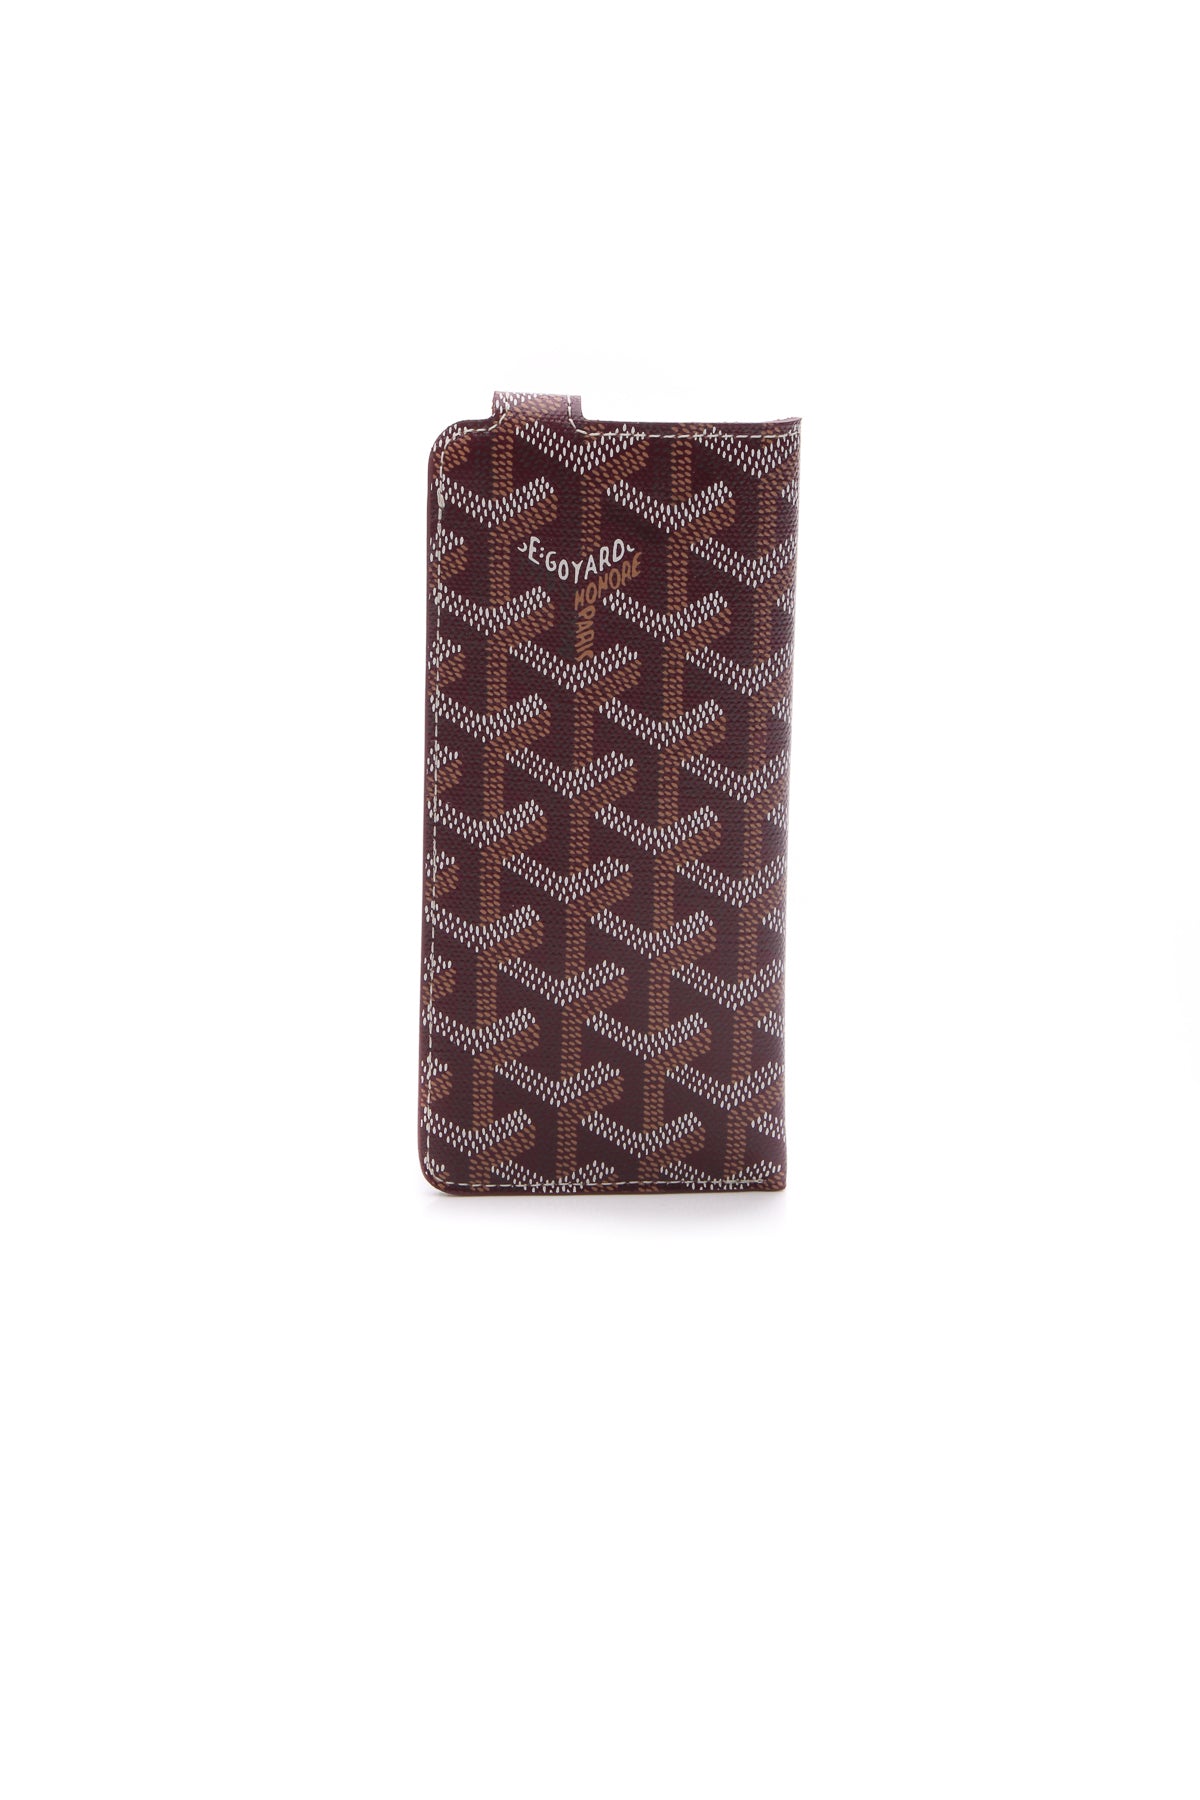 Louis Vuitton, Accessories, Louis Vuitton Card Holder Keychain Pouch  Converted From Iphone 3 Case Custom